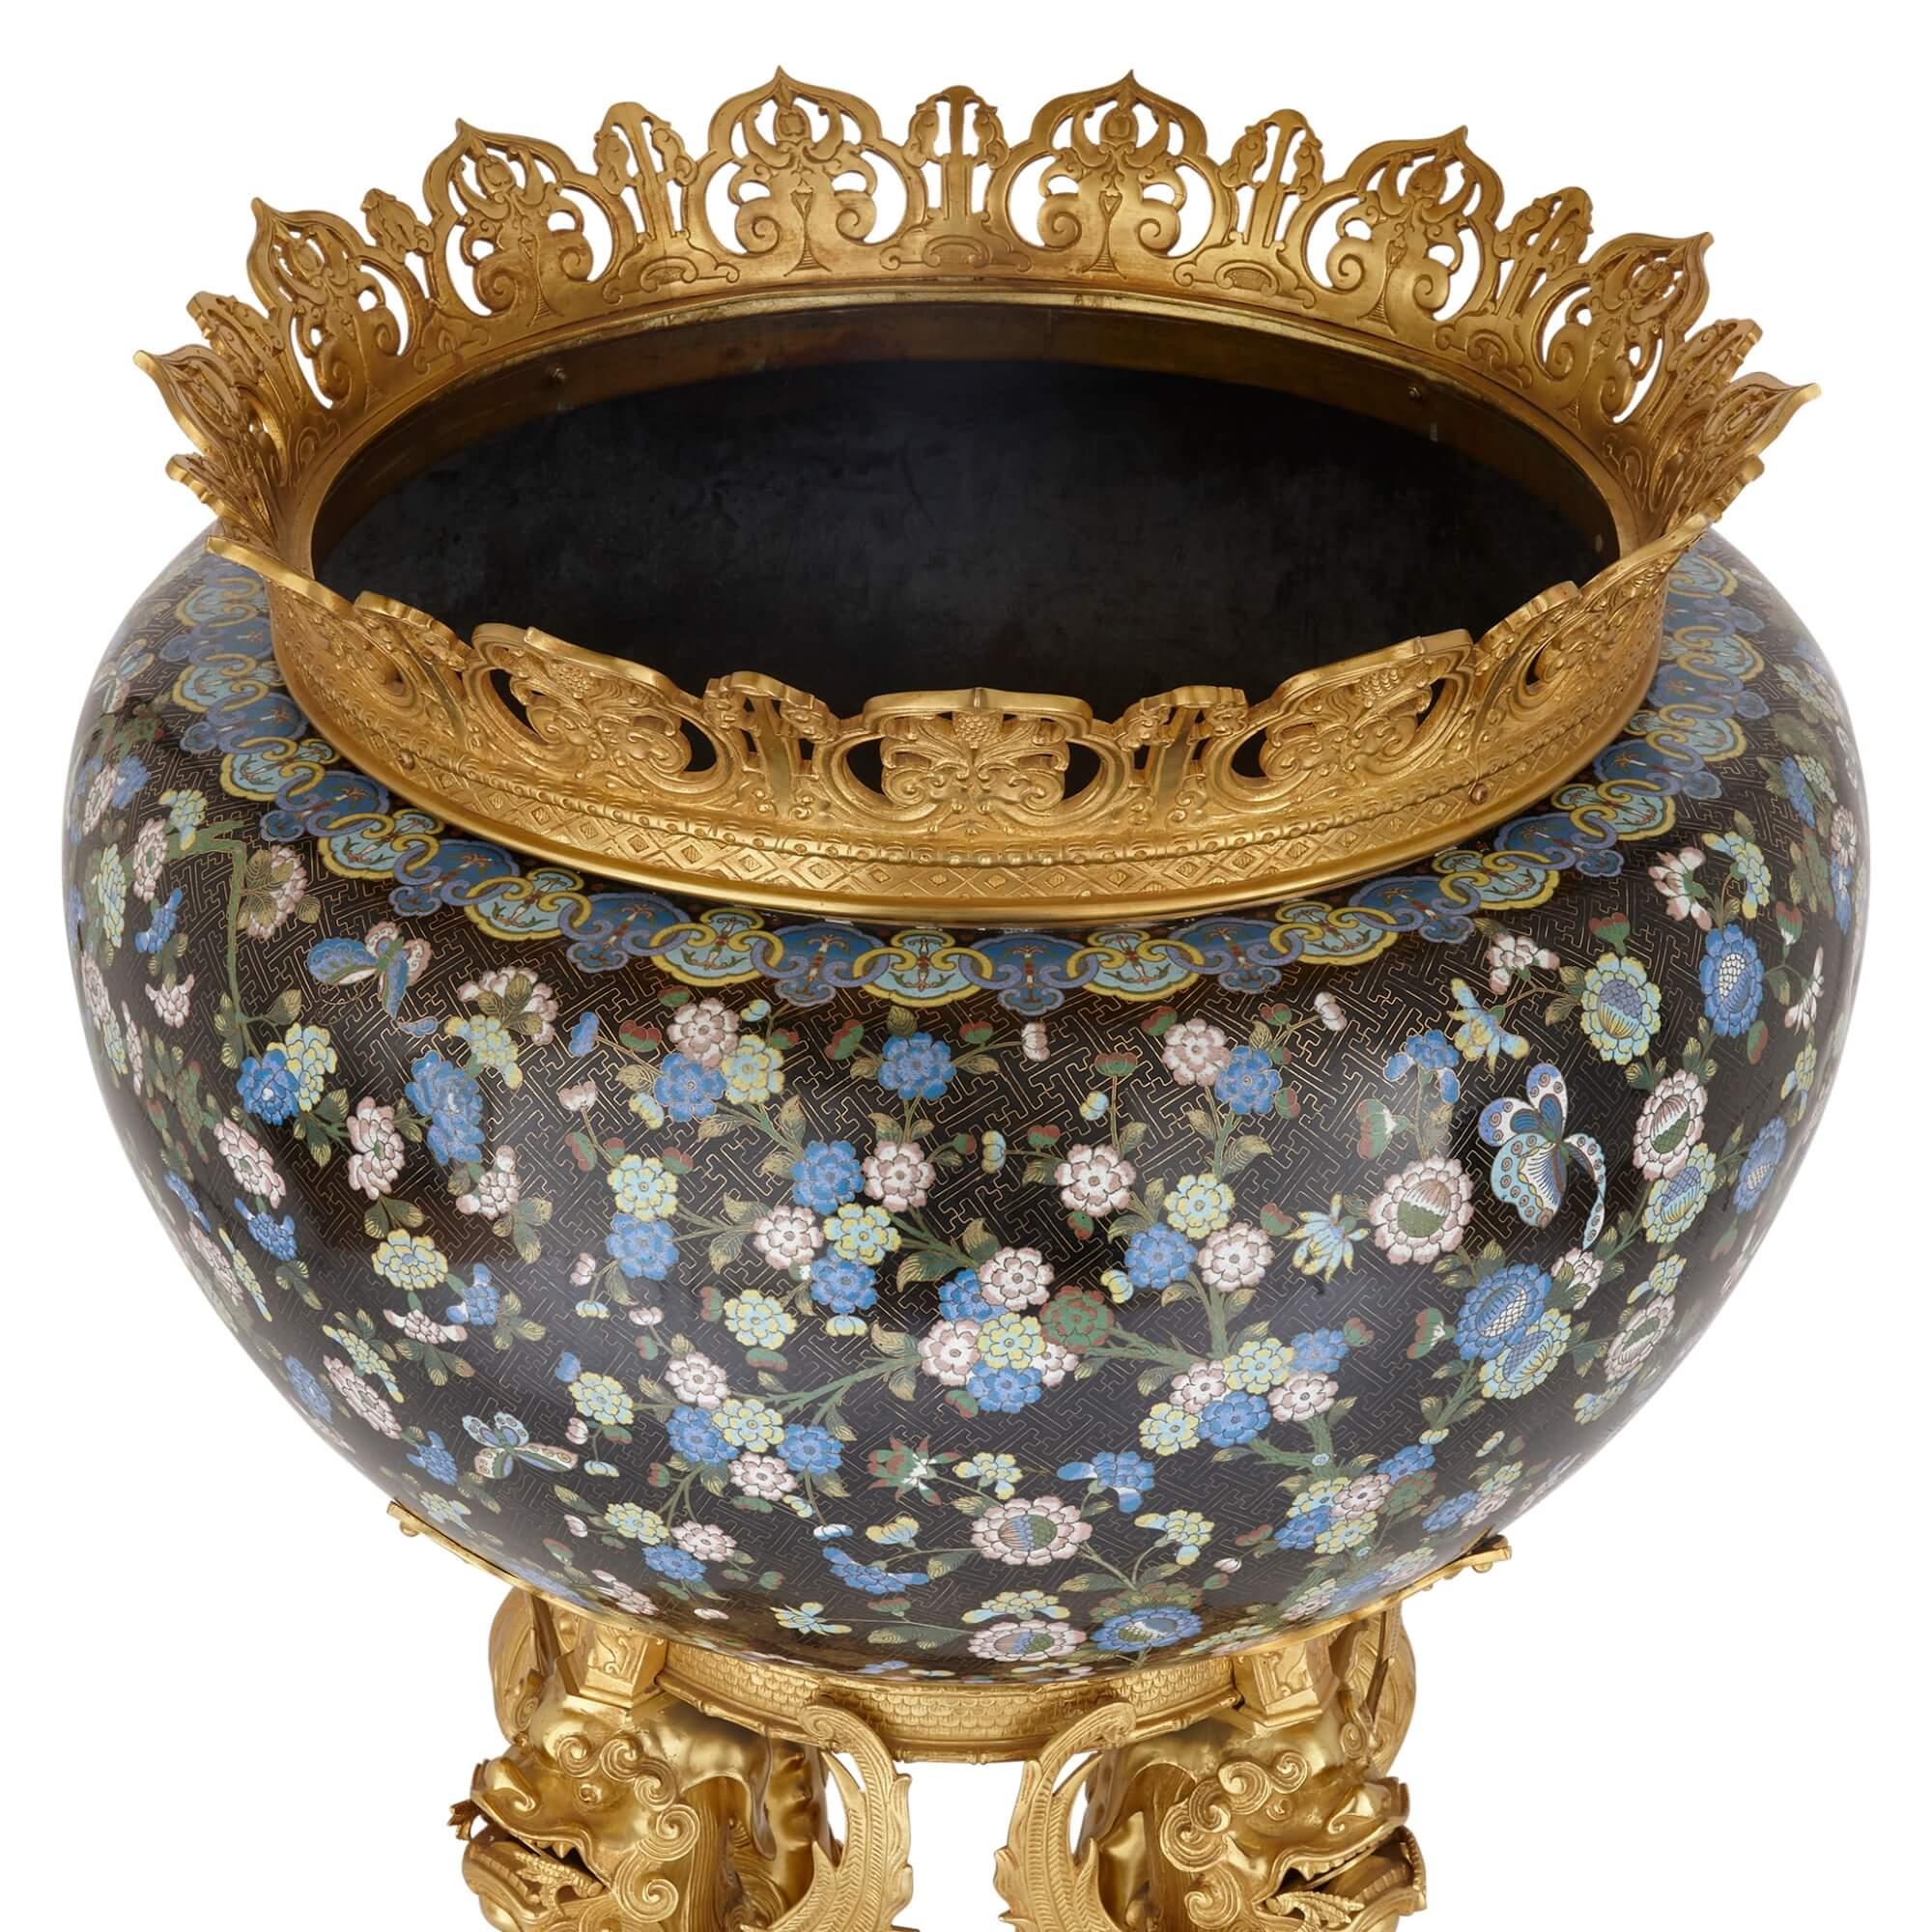 Monumental Chinese cloisonné enamel ormolu mounted jardinière
Chinese and French, Late 19th Century
Height 105cm, diameter 71cm

This magnificent piece is a large ormolu mounted cloisonné enamel jardinière, consisting of a Chinese enamel central